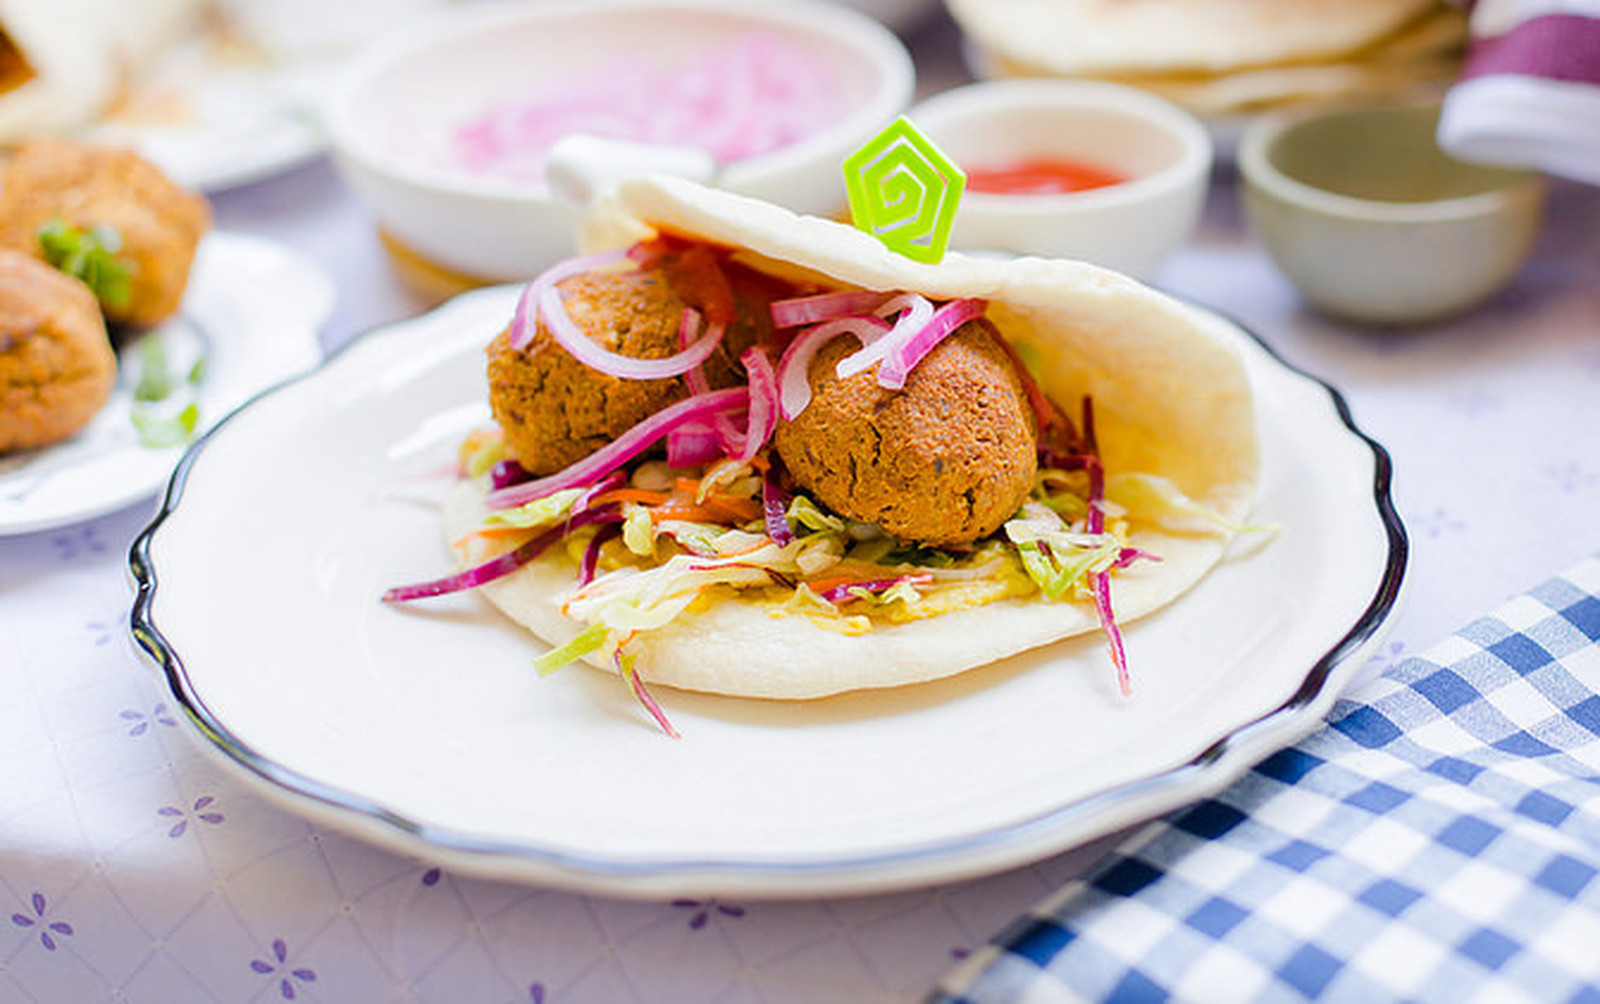 Chickpea and Almond Meal Falafel With Mint [Vegan, Gluten-Free]